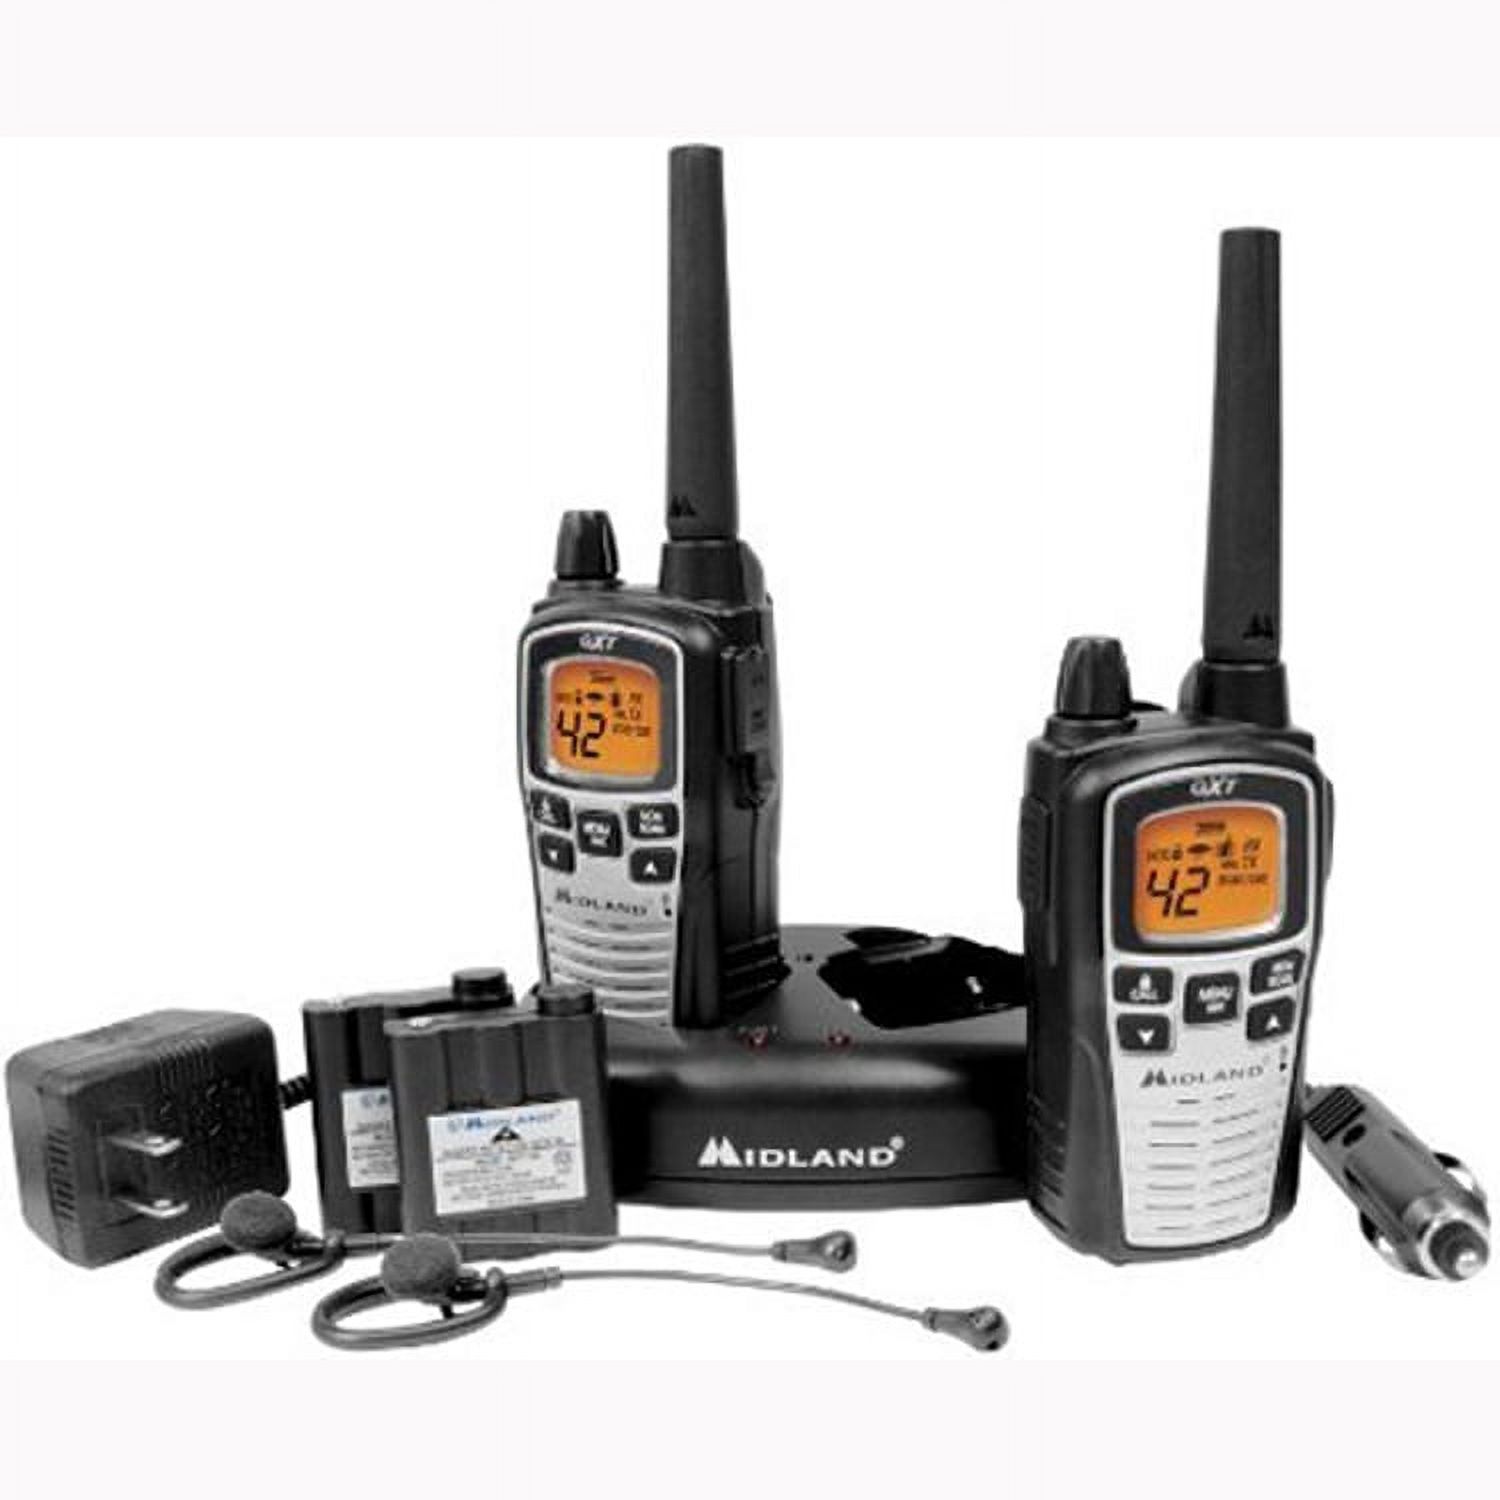 MIDLAND GXT860VP4 36-Mile GMRS Radio Pair Pack with Drop-in Charger Rechargeable Batteries & Headsets - image 1 of 3